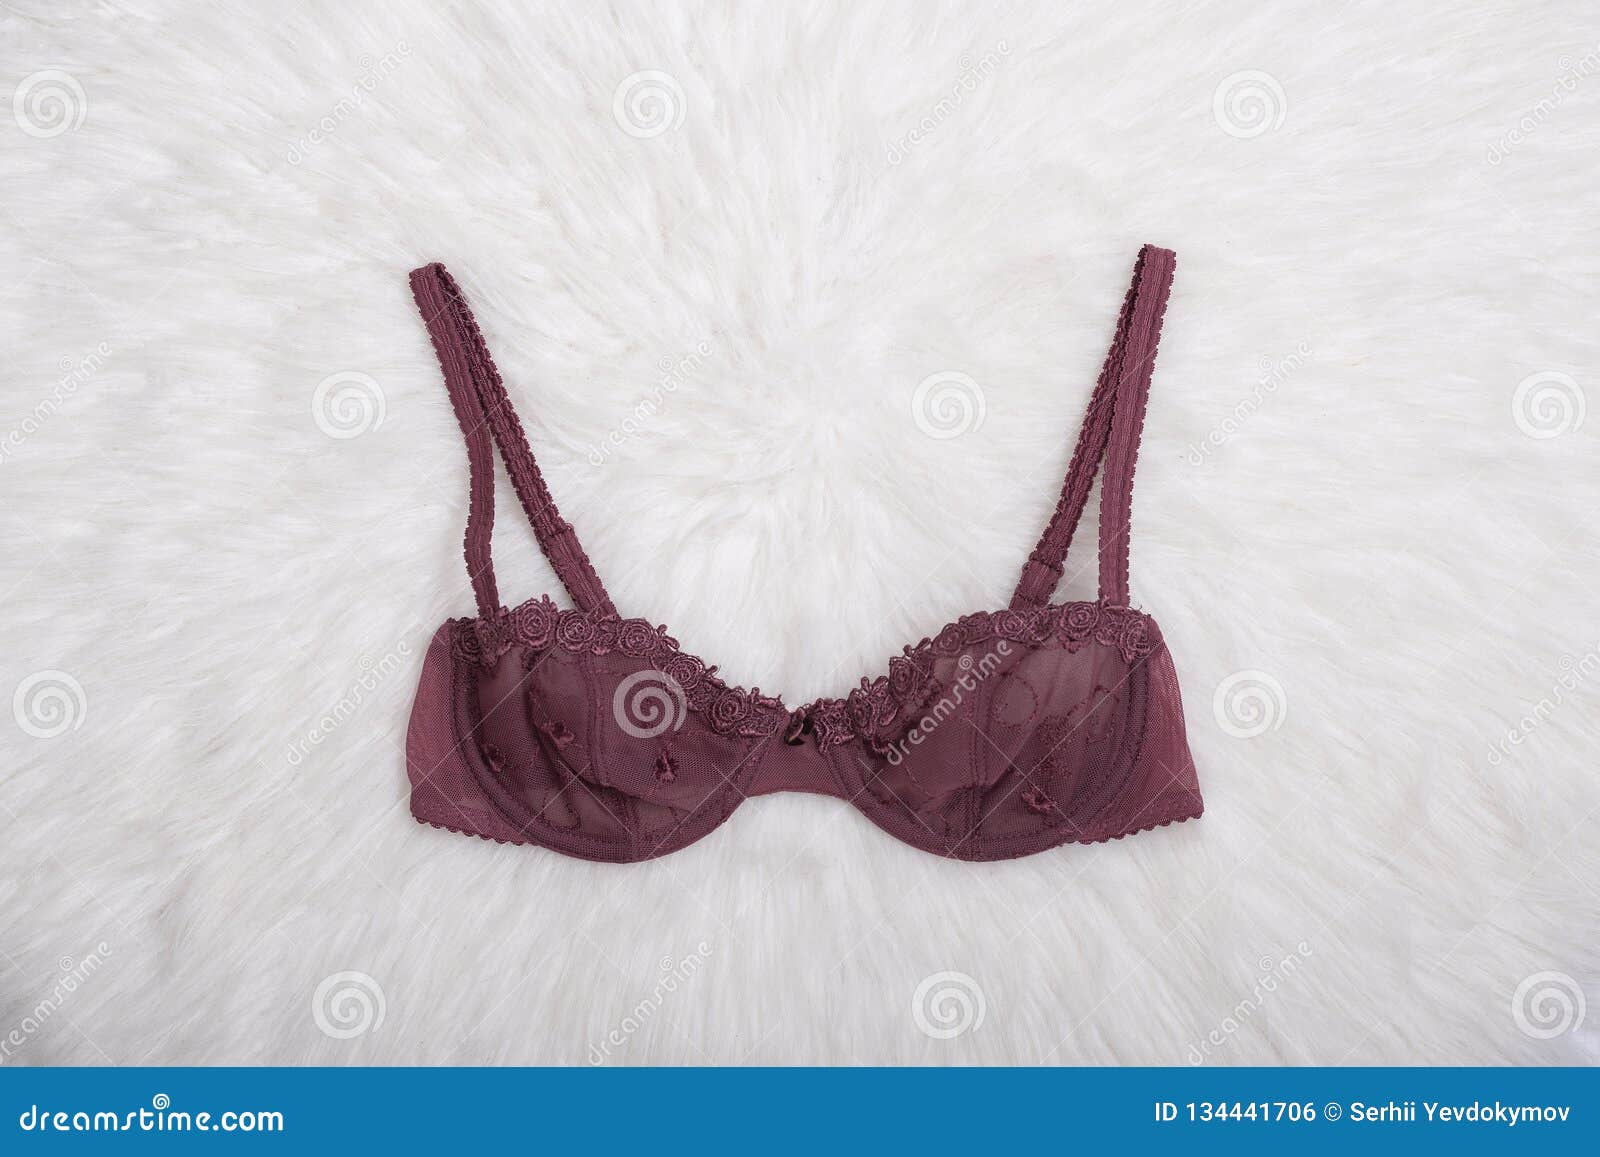 Burgundy lace bra in female hand. Fashion concept Stock Photo by